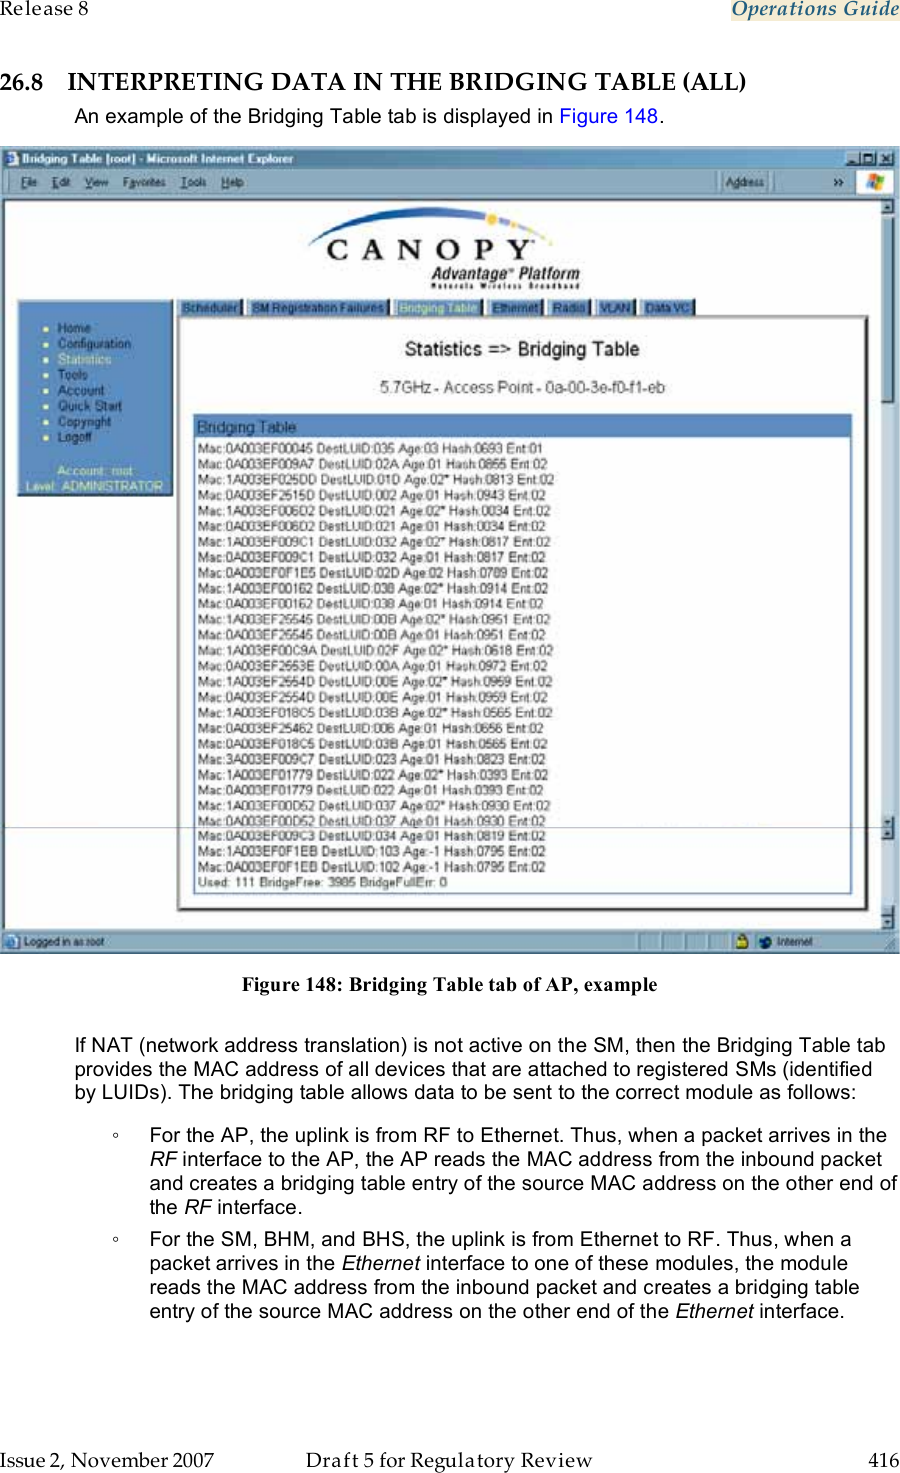 Release 8    Operations Guide   Issue 2, November 2007  Draft 5 for Regulatory Review  416     26.8 INTERPRETING DATA IN THE BRIDGING TABLE (ALL) An example of the Bridging Table tab is displayed in Figure 148.  Figure 148: Bridging Table tab of AP, example  If NAT (network address translation) is not active on the SM, then the Bridging Table tab provides the MAC address of all devices that are attached to registered SMs (identified by LUIDs). The bridging table allows data to be sent to the correct module as follows: ◦  For the AP, the uplink is from RF to Ethernet. Thus, when a packet arrives in the RF interface to the AP, the AP reads the MAC address from the inbound packet and creates a bridging table entry of the source MAC address on the other end of the RF interface. ◦  For the SM, BHM, and BHS, the uplink is from Ethernet to RF. Thus, when a packet arrives in the Ethernet interface to one of these modules, the module reads the MAC address from the inbound packet and creates a bridging table entry of the source MAC address on the other end of the Ethernet interface. 